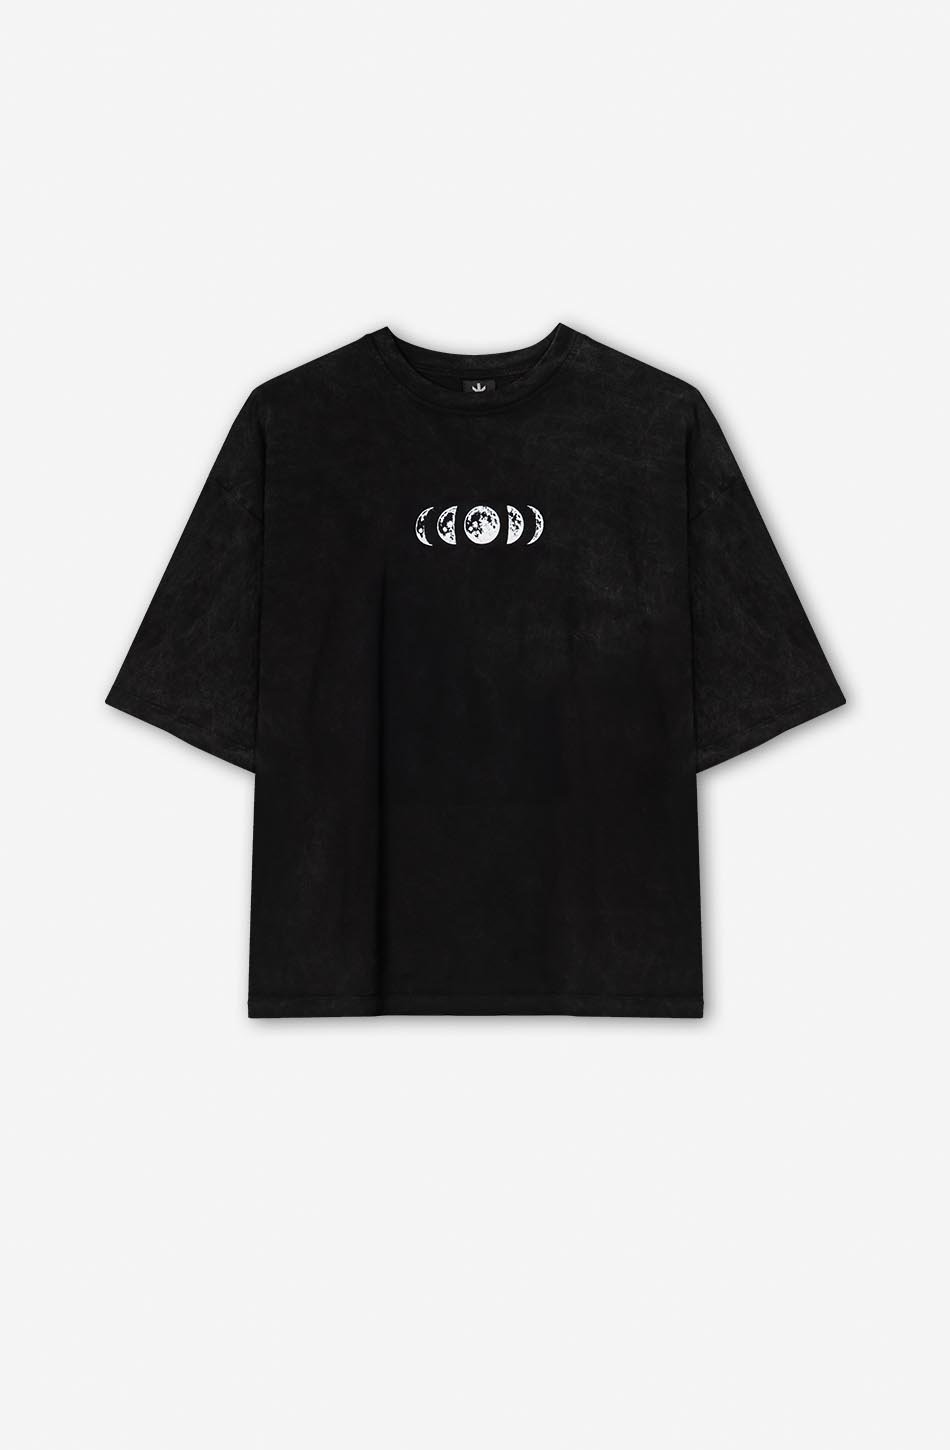 Cropped Hand Space Black T-Shirt